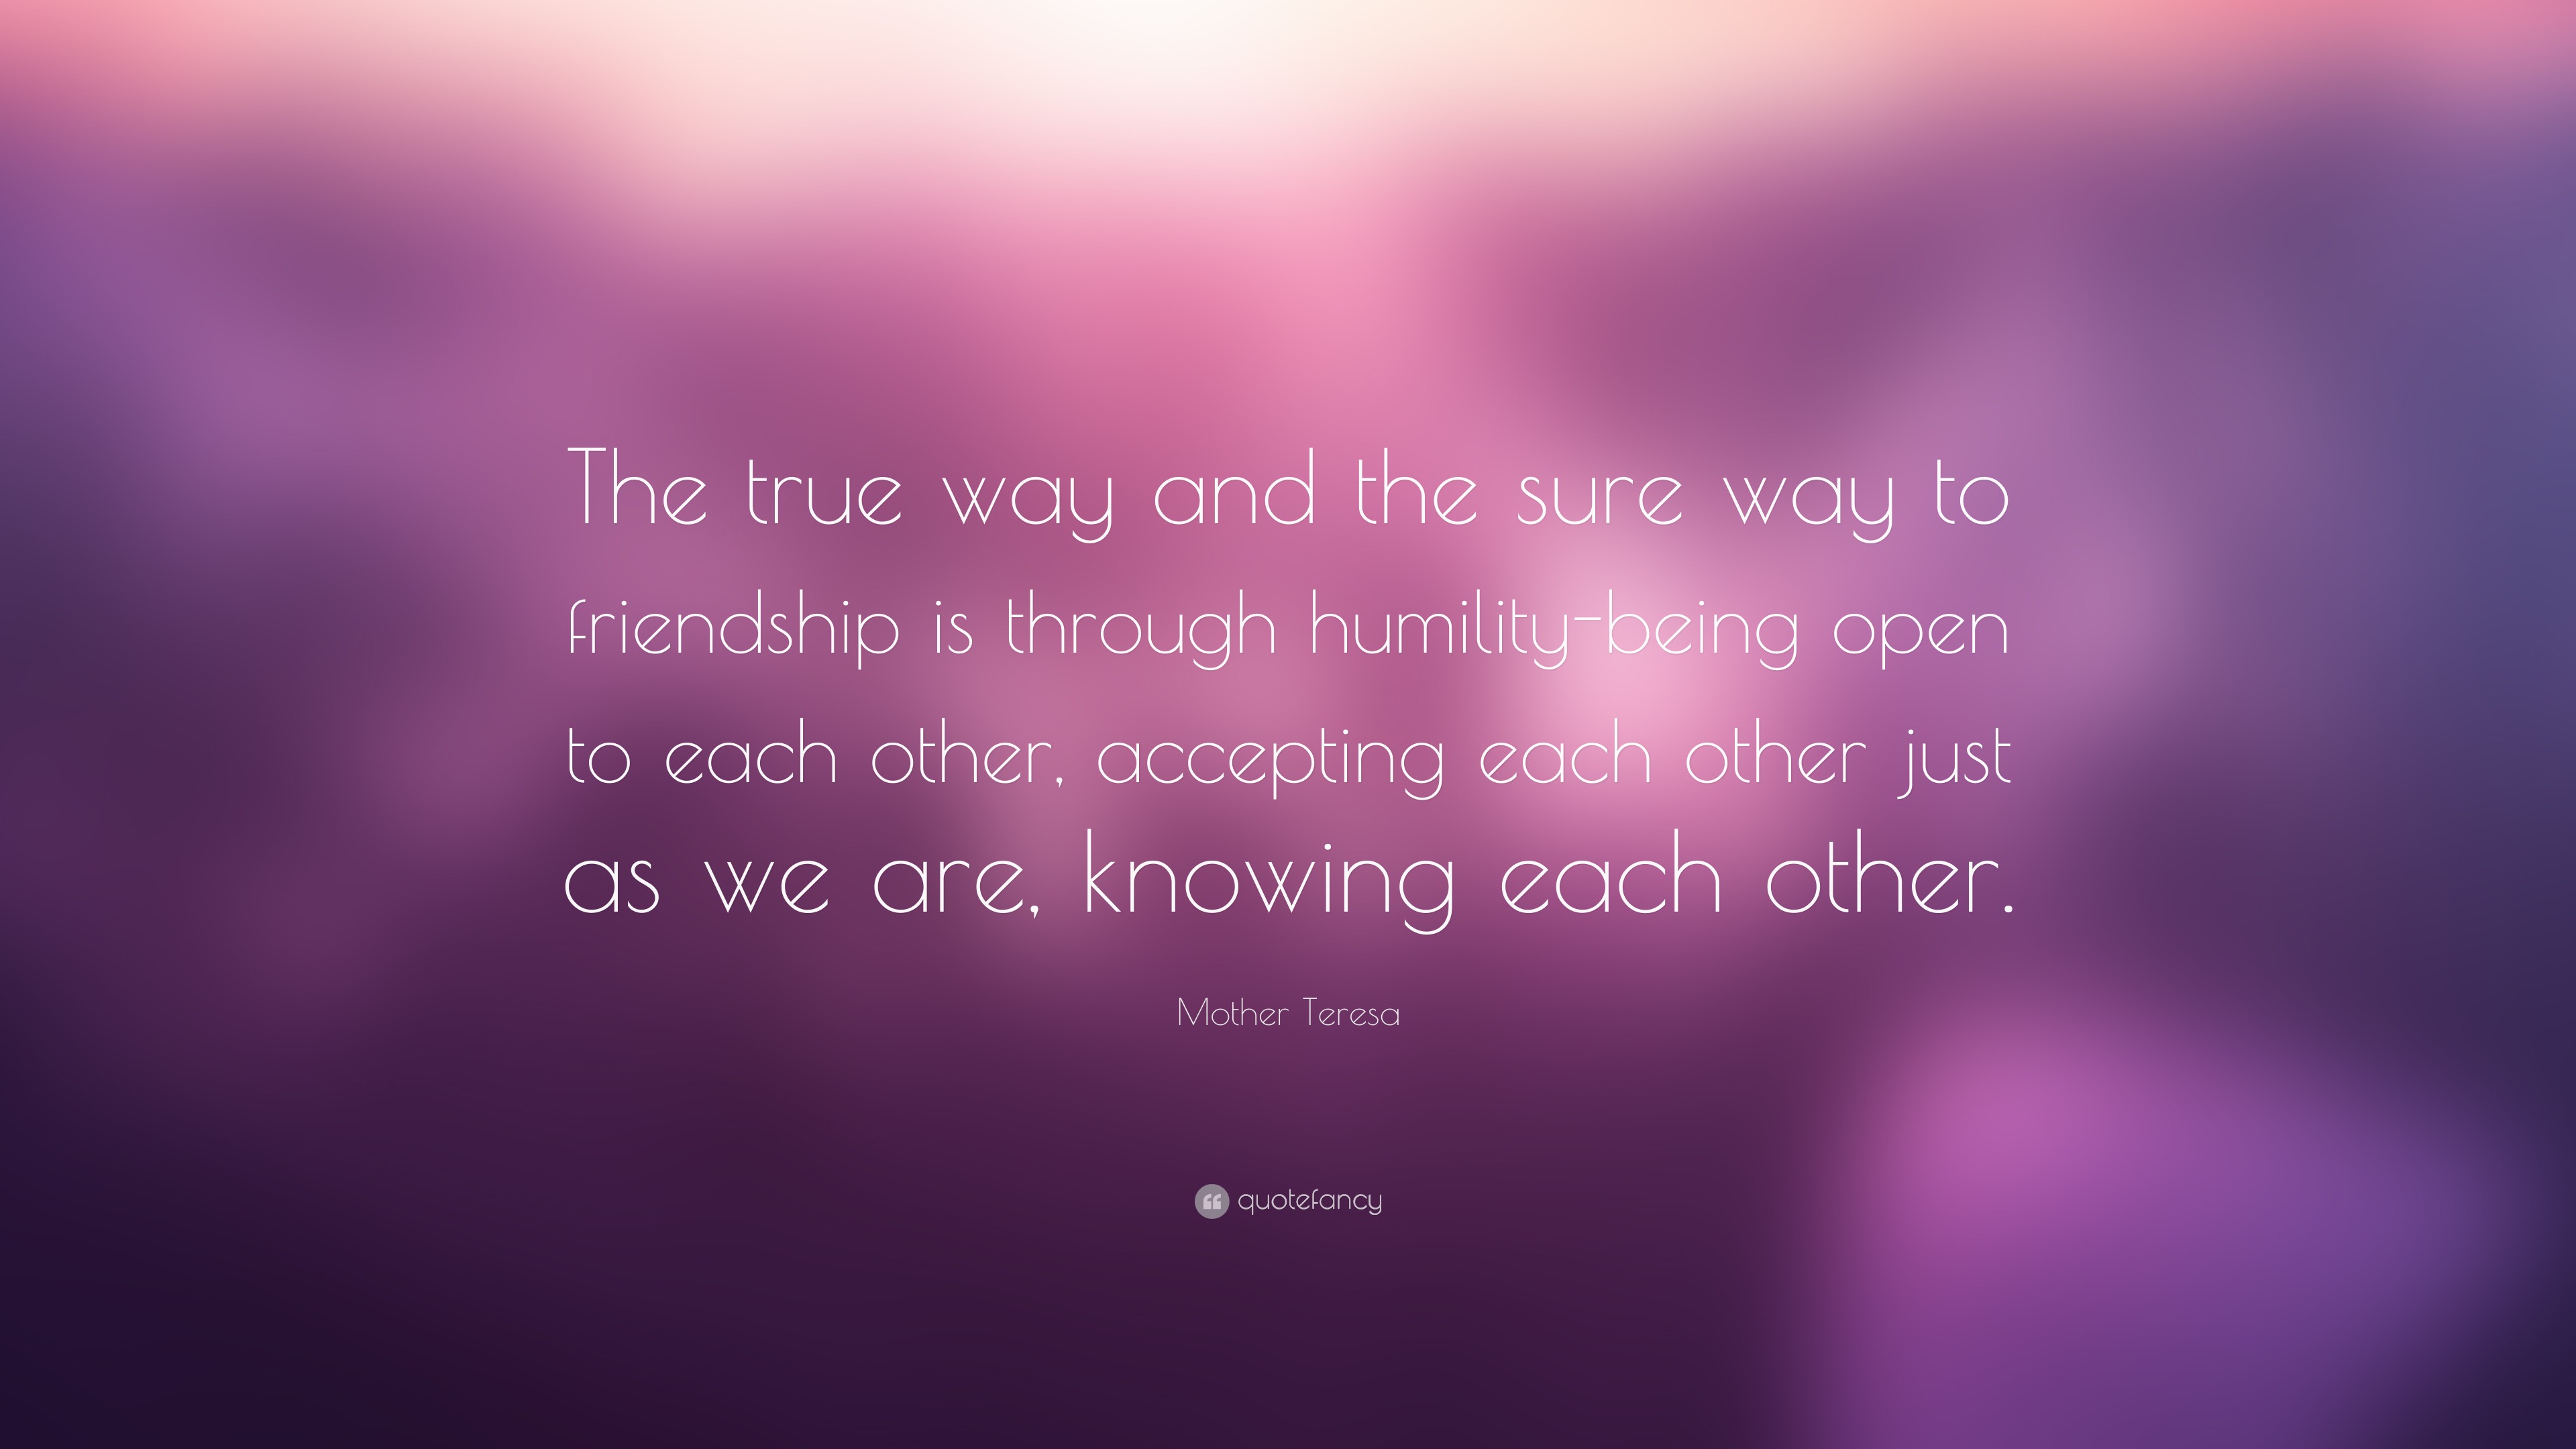 Mother Teresa Quote: “The true way and the sure way to friendship is ...